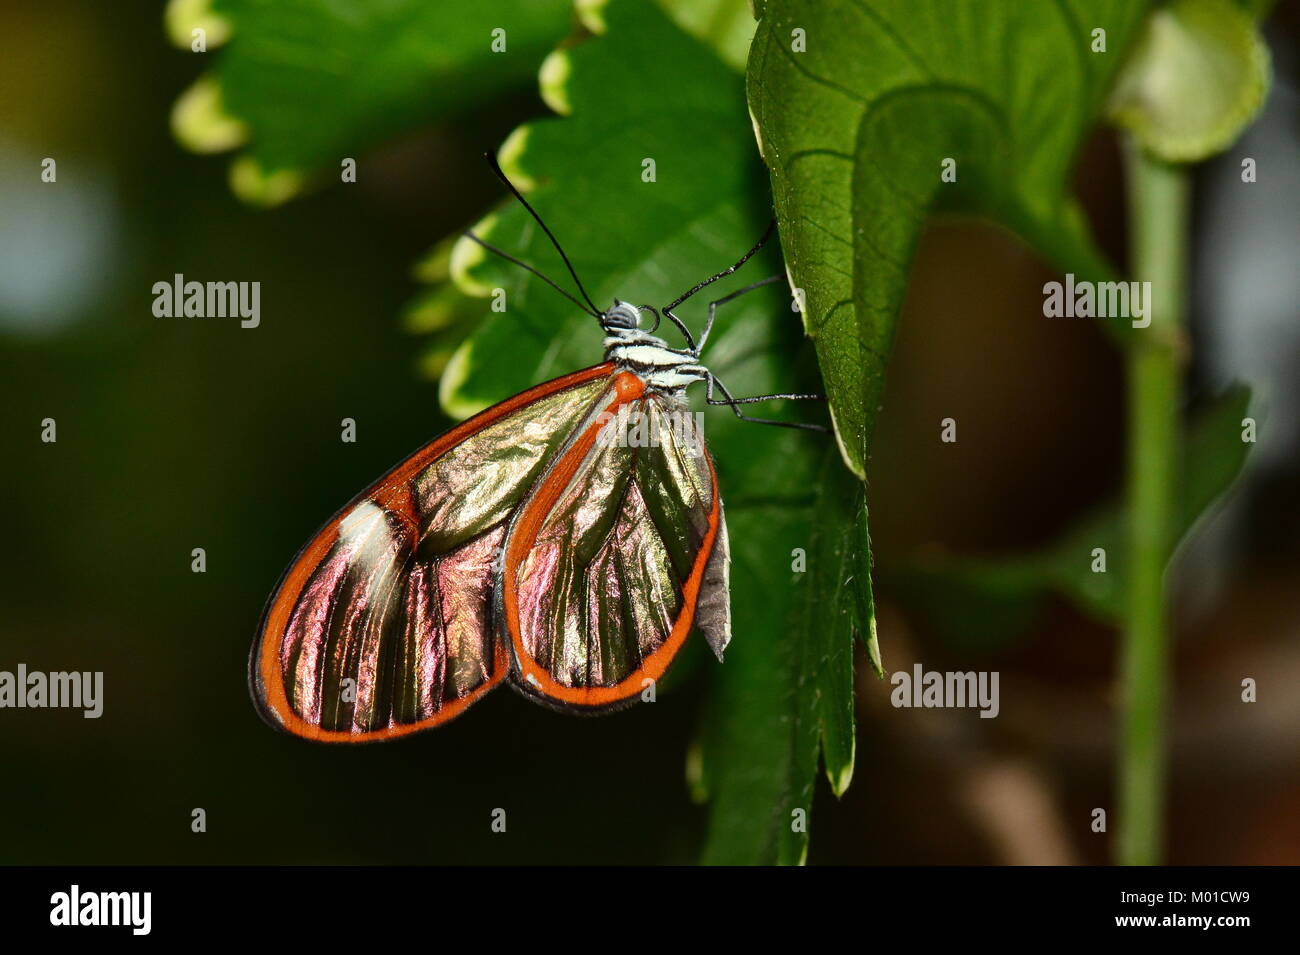 A pretty glass wing butterfly lands on a leaf in the gardens for a visit. Stock Photo